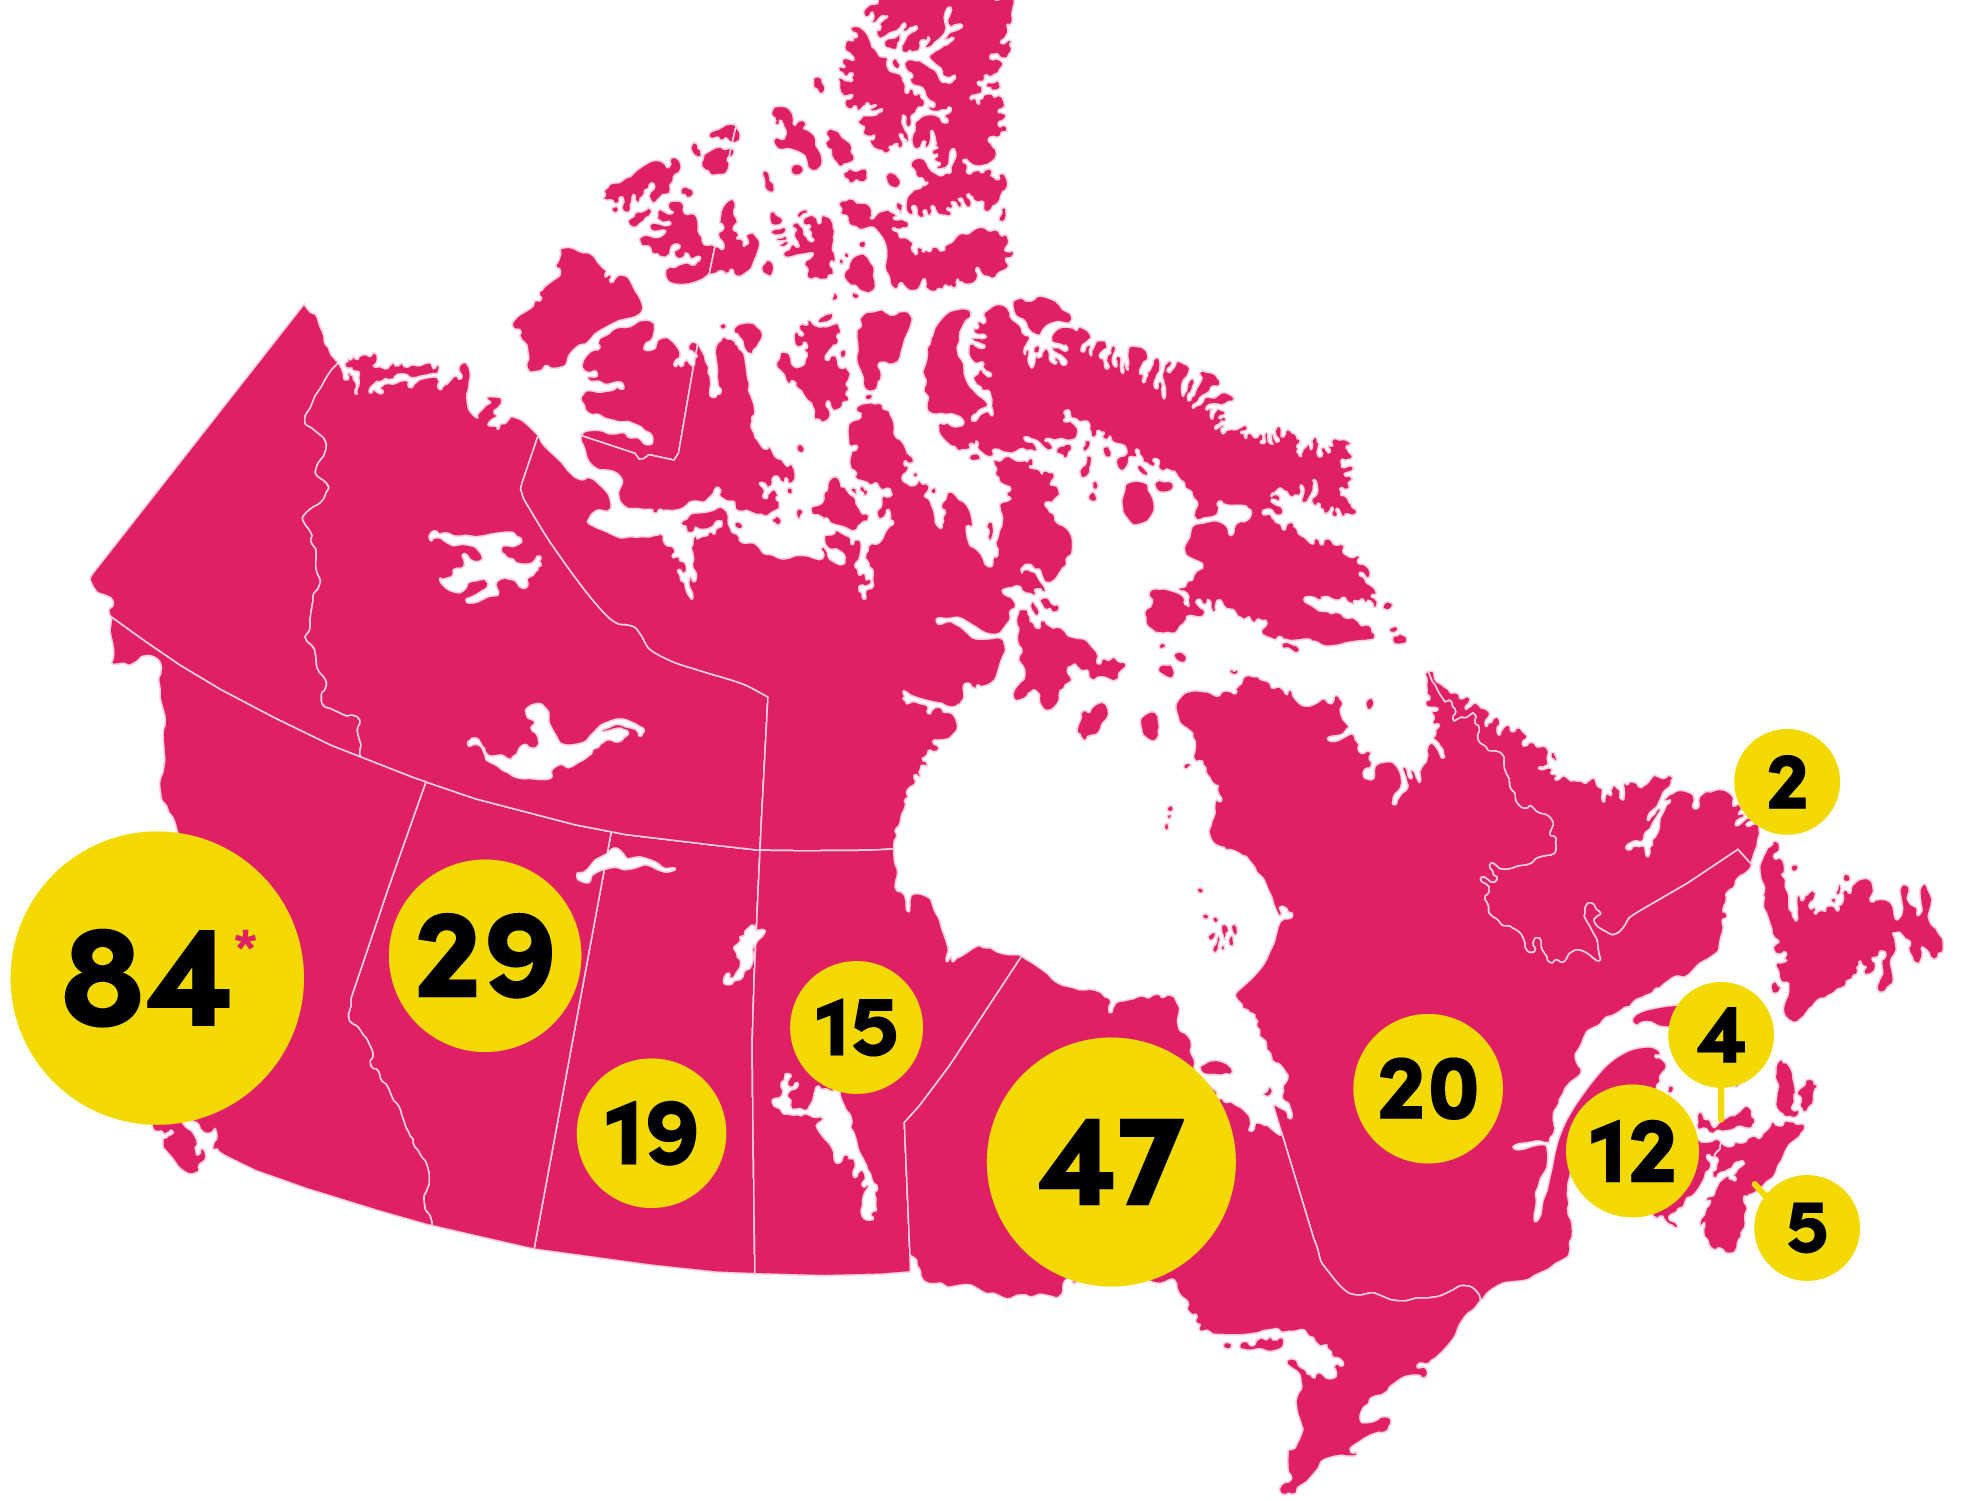 Map of Canada showing 84 participating homes in British Columbia, 29 participating homes in Alberta, 19 participating homes in Saskatchewan, 15 participating homes in Manitoba, 47 participating homes in Ontario, 20 participating homes in Quebec, 12 participating homes in New Brunswick, four participating homes on Prince Edward Island, five participating homes in Nova Scotia, and two participating homes in Newfoundland and Labrador.